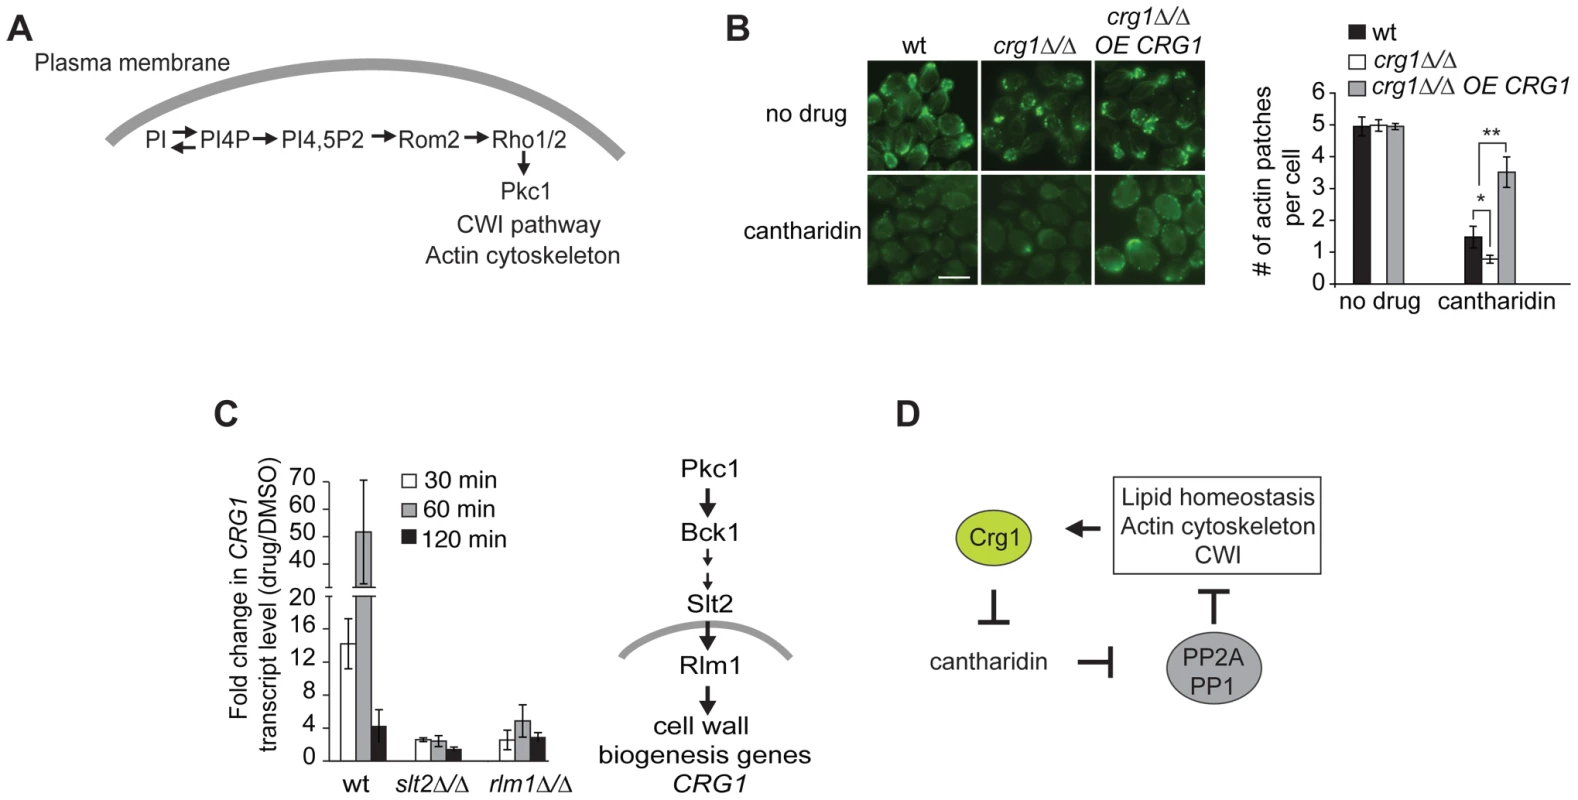 Crg1 is important for actin patch formation during cantharidin treatment.